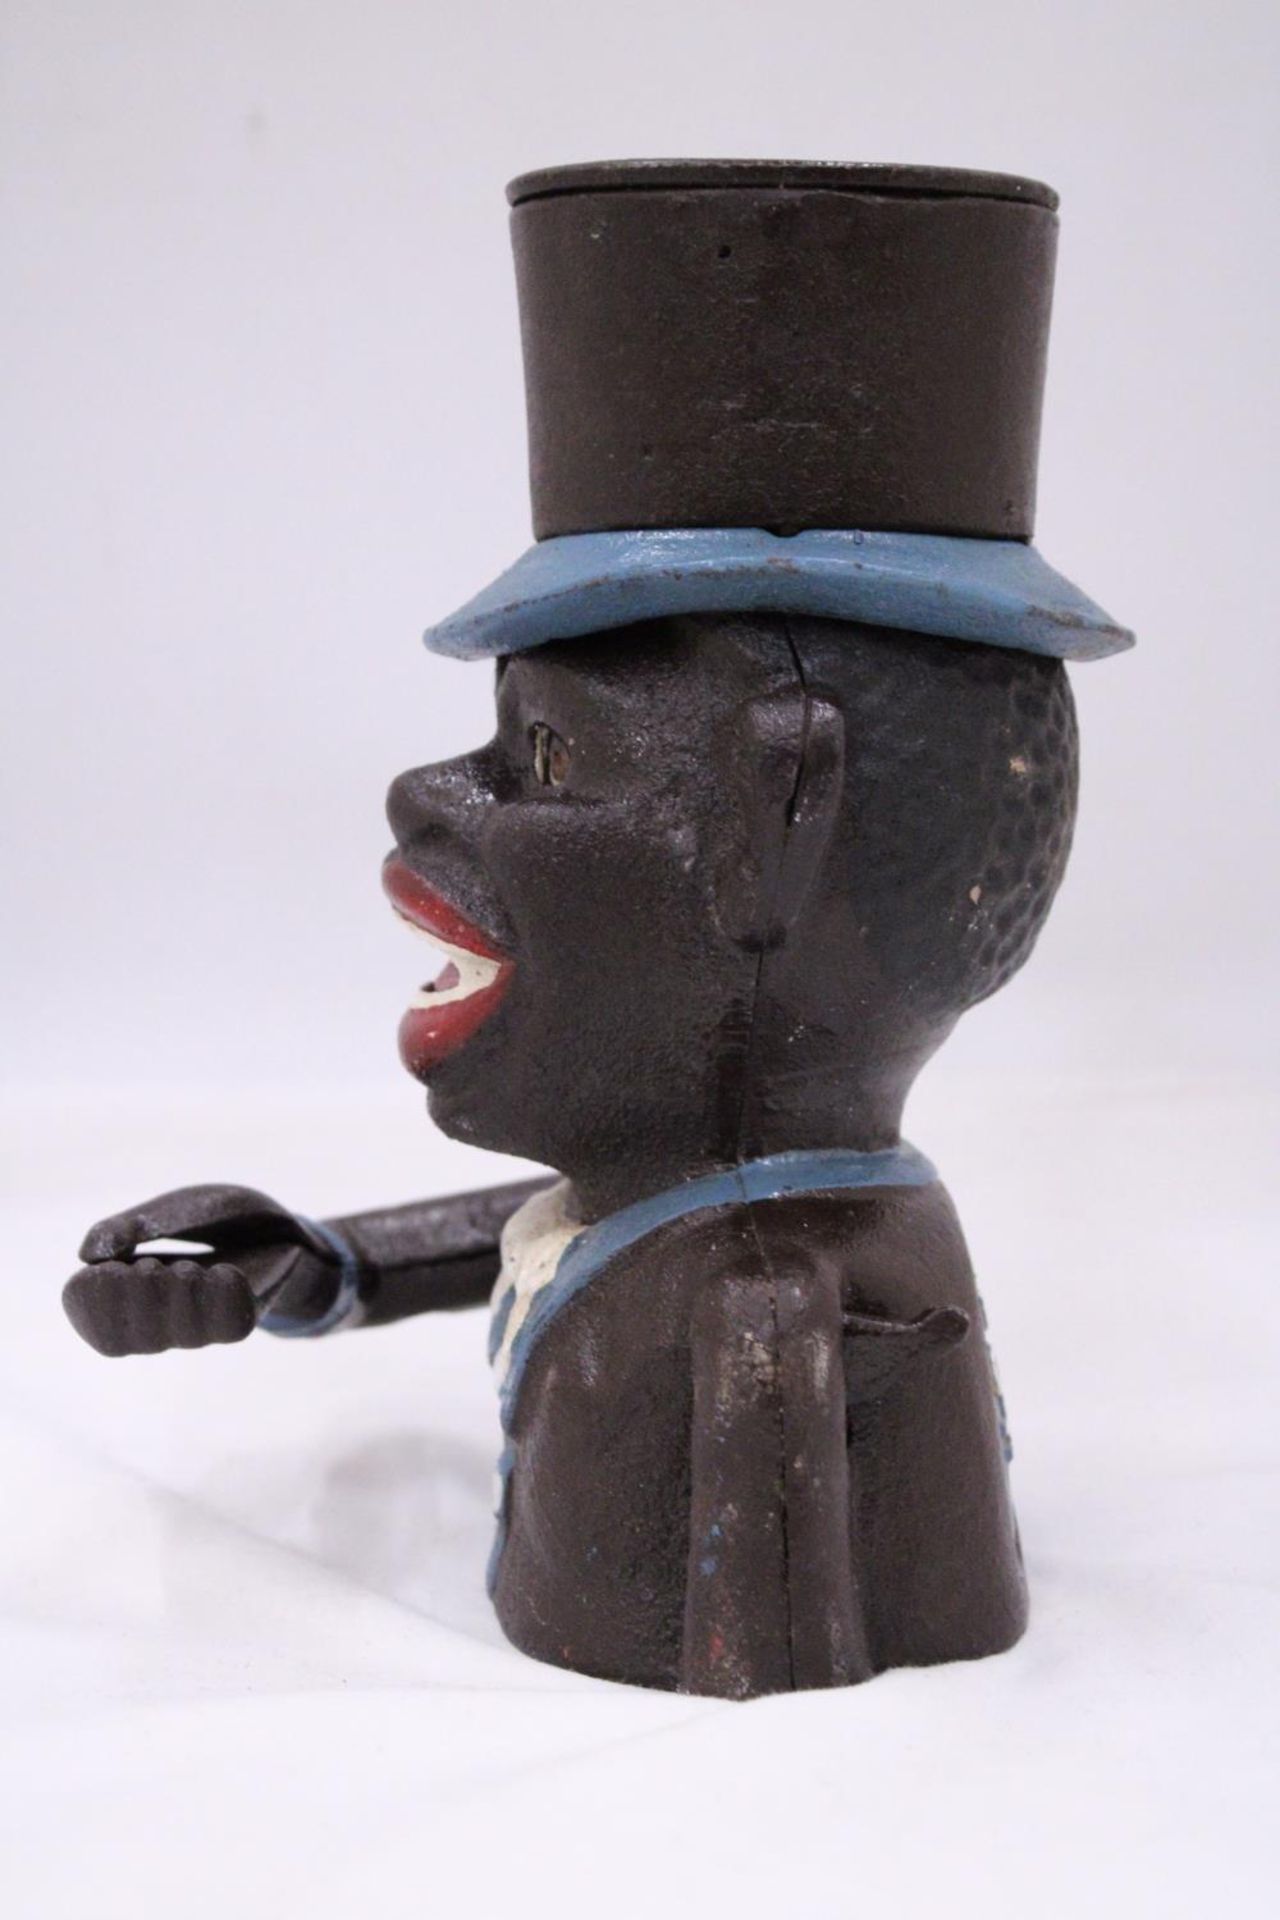 A VINTAGE CAST IRON AFRICAN AMERICAN IN TOP HAT - Image 4 of 4